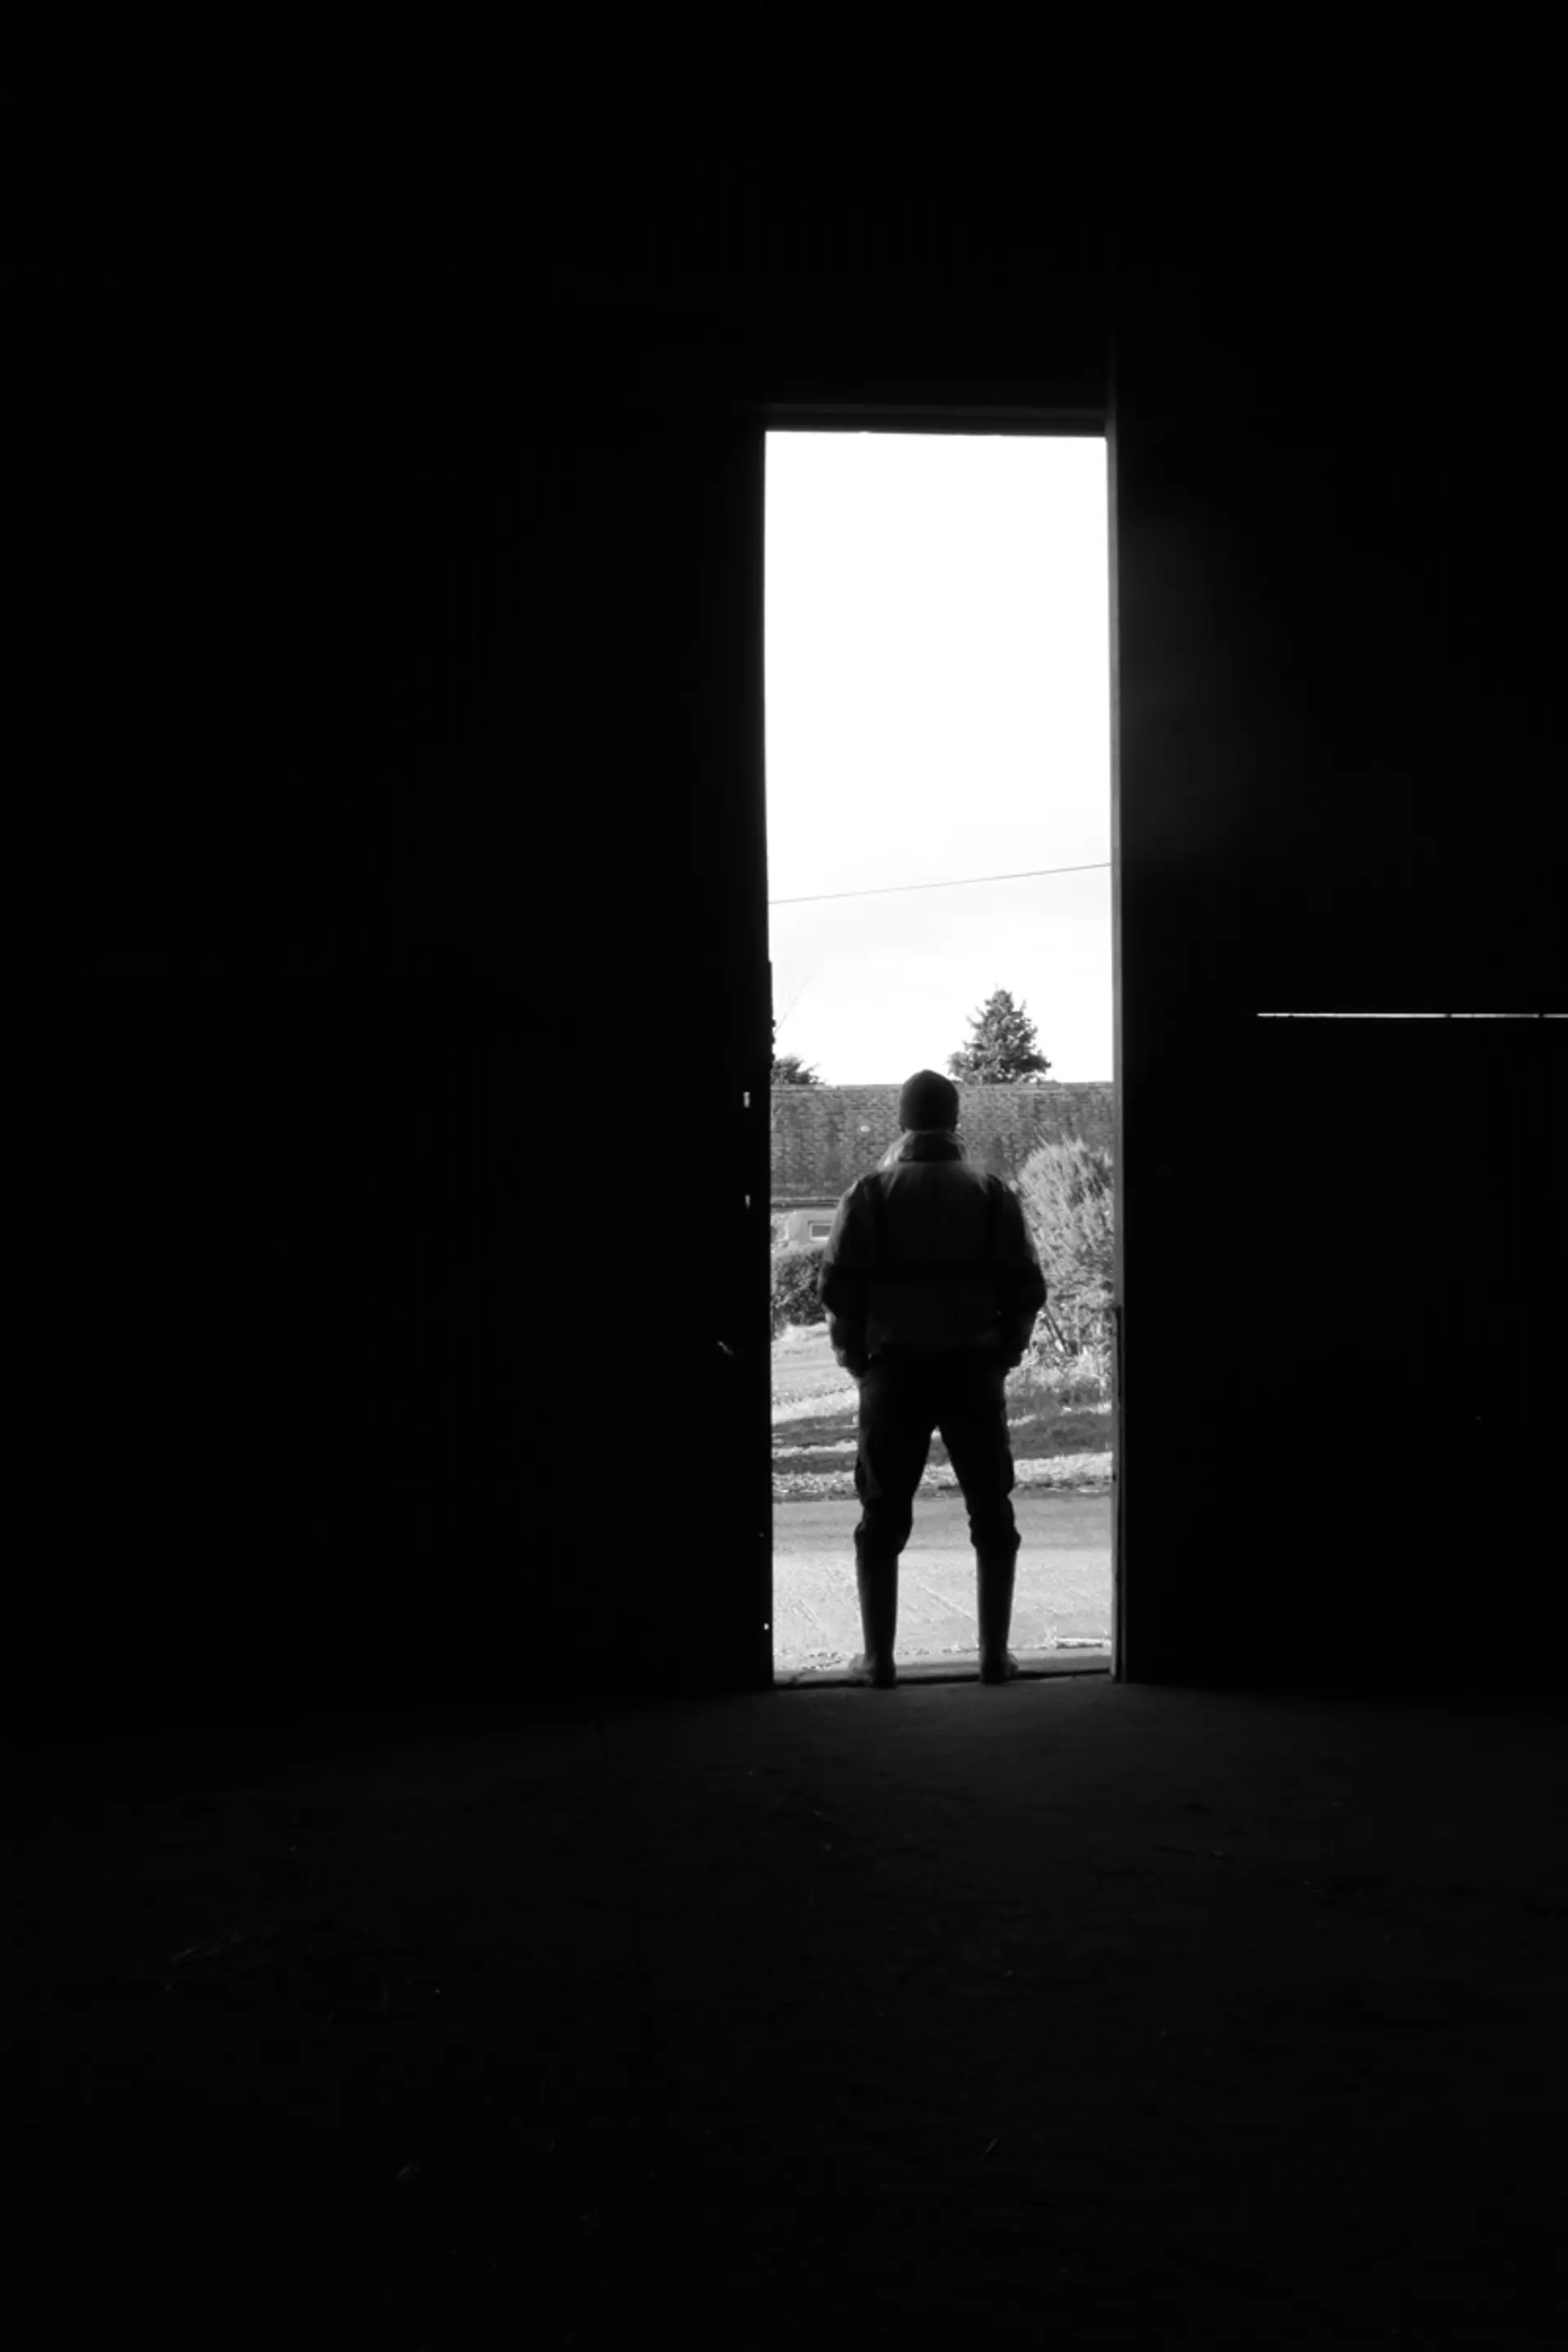 A grayscale image of a silhouette of a farmer standing in the doorway of a barn. They are facing away.